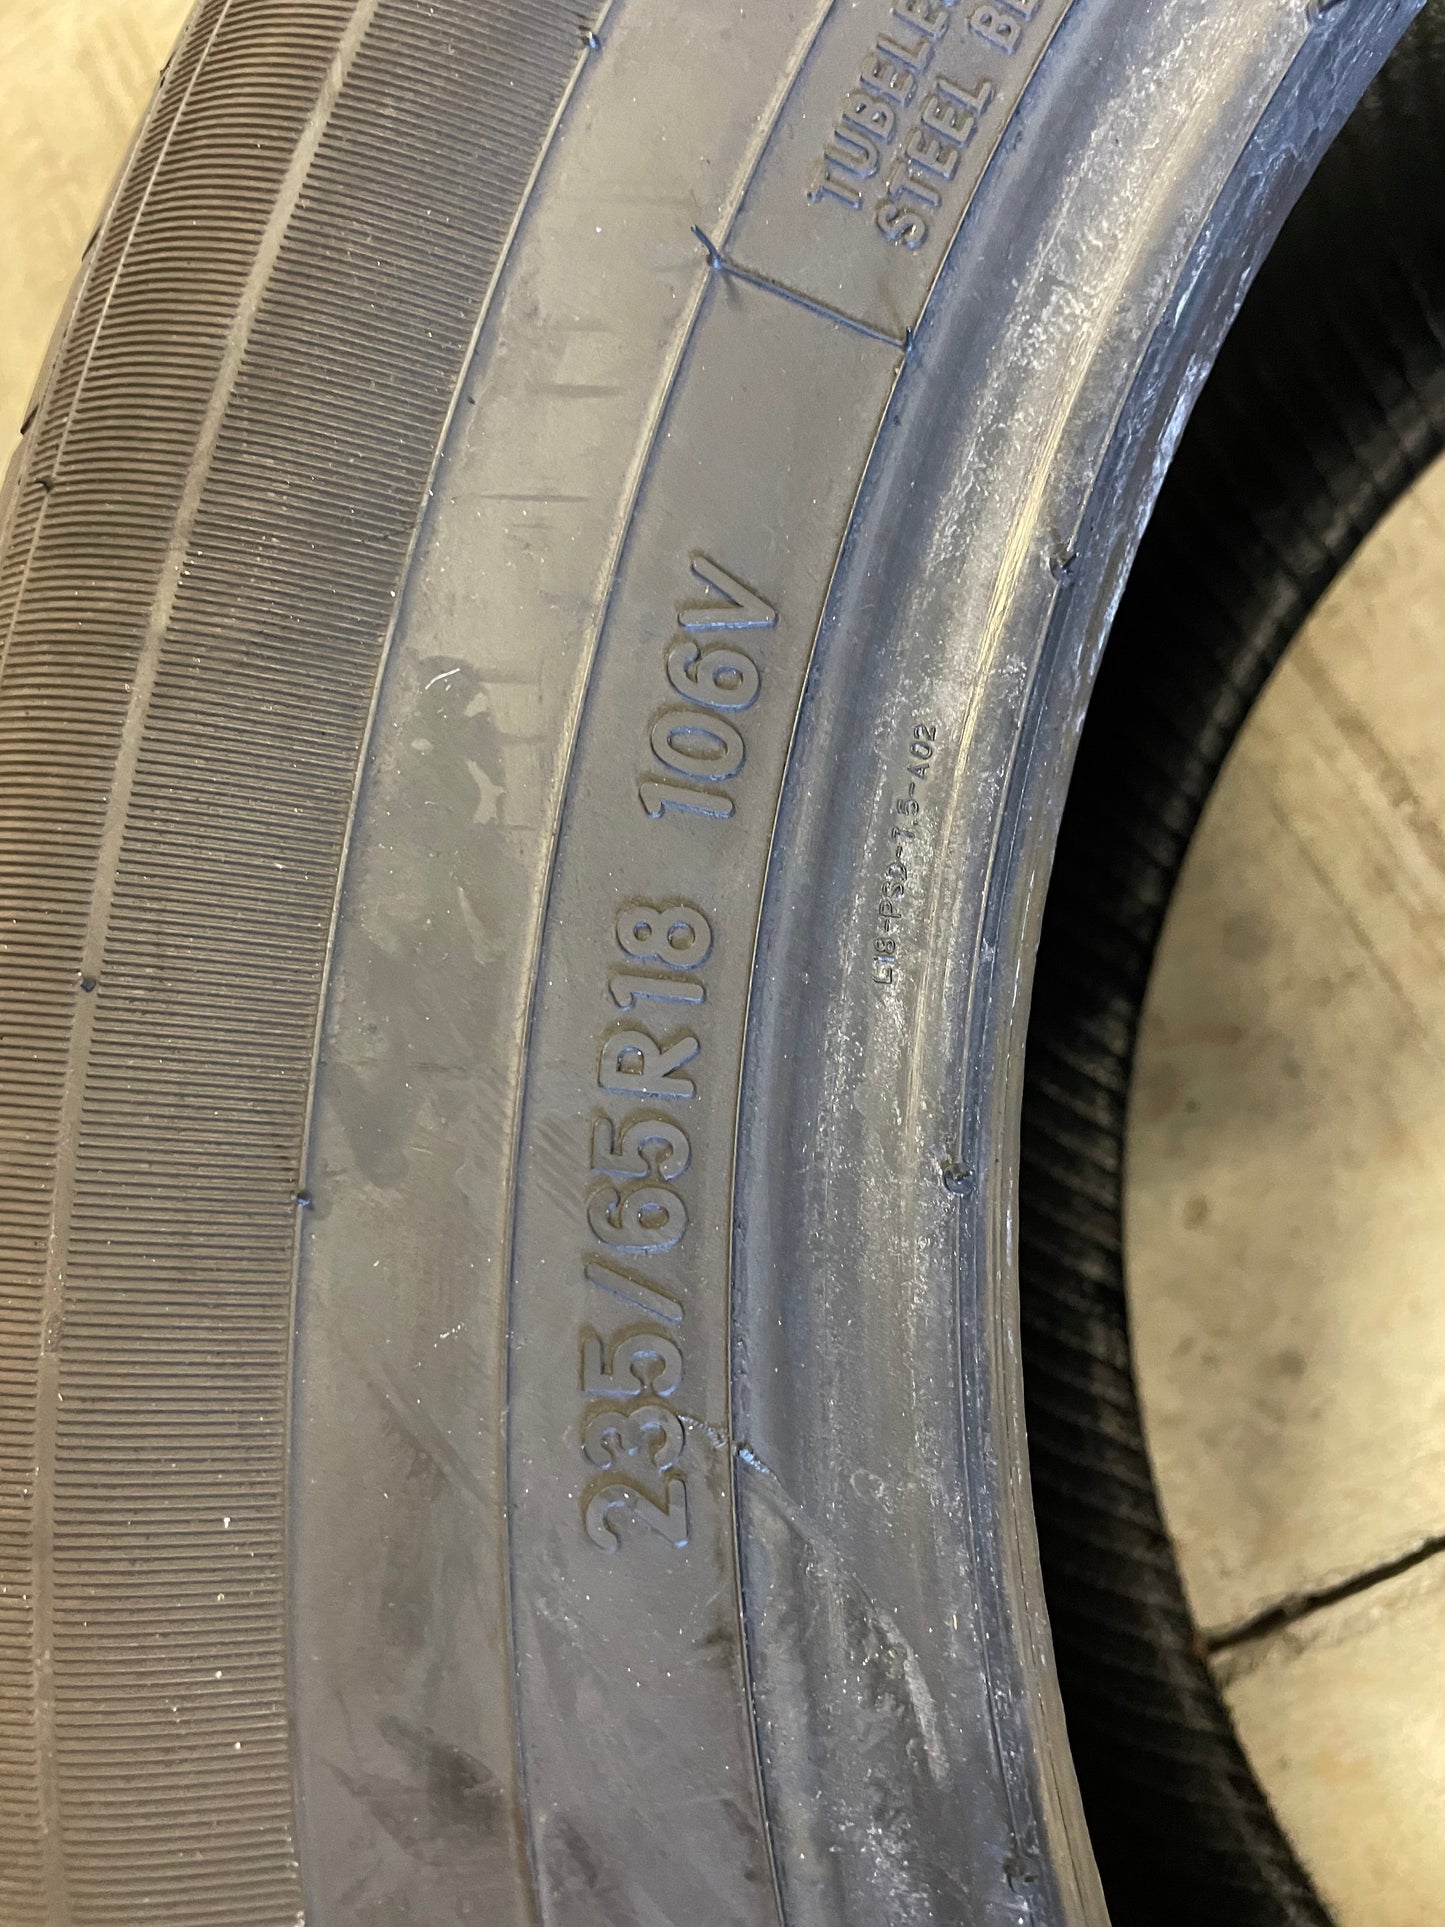 SET OF 2 235/65R18 Toyo Open Country A43 106 V SL - Used Tires